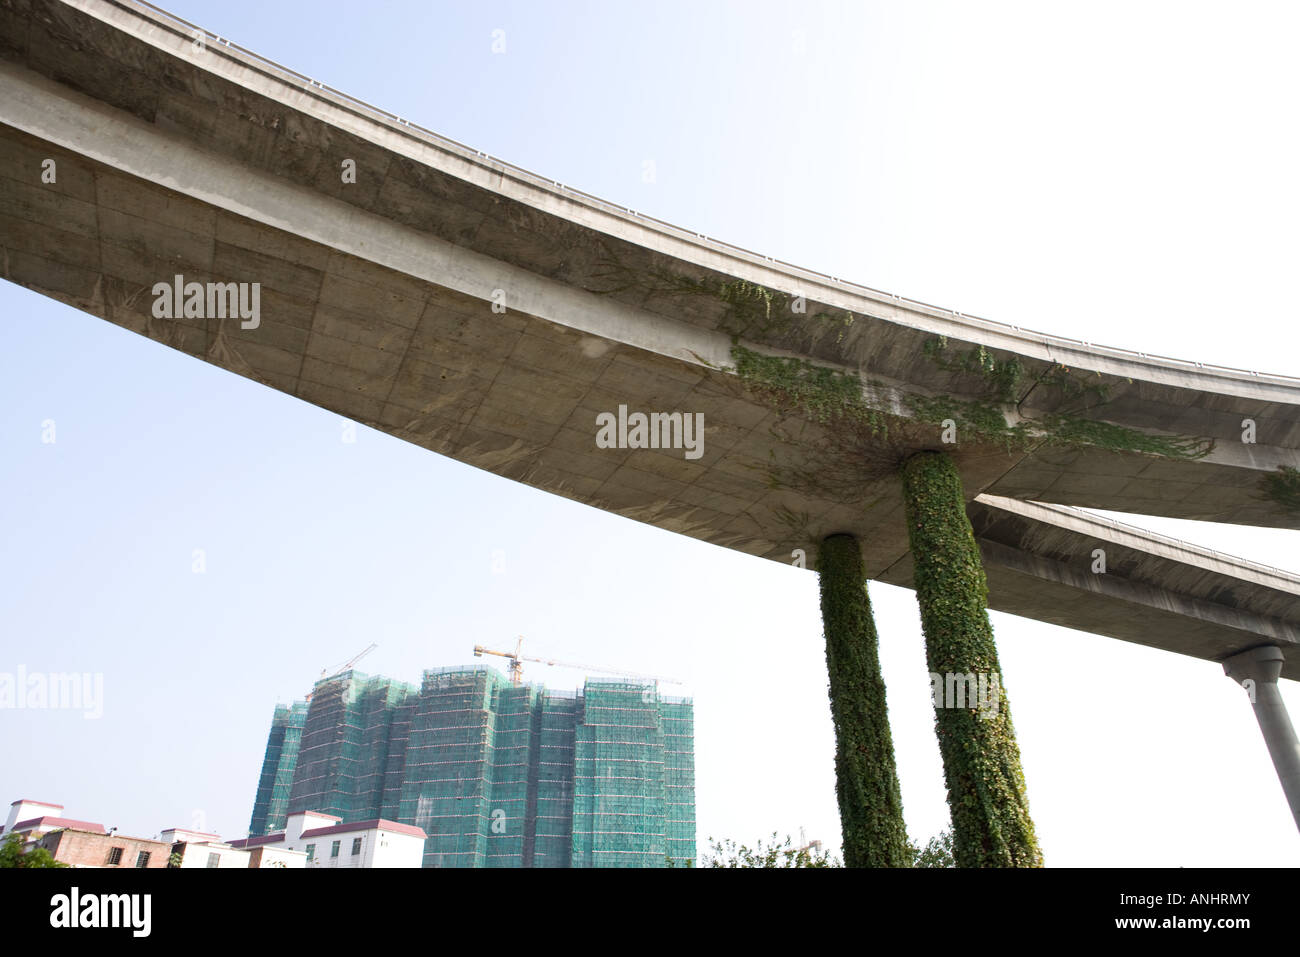 Overpass, high rises with scaffolding in background Stock Photo